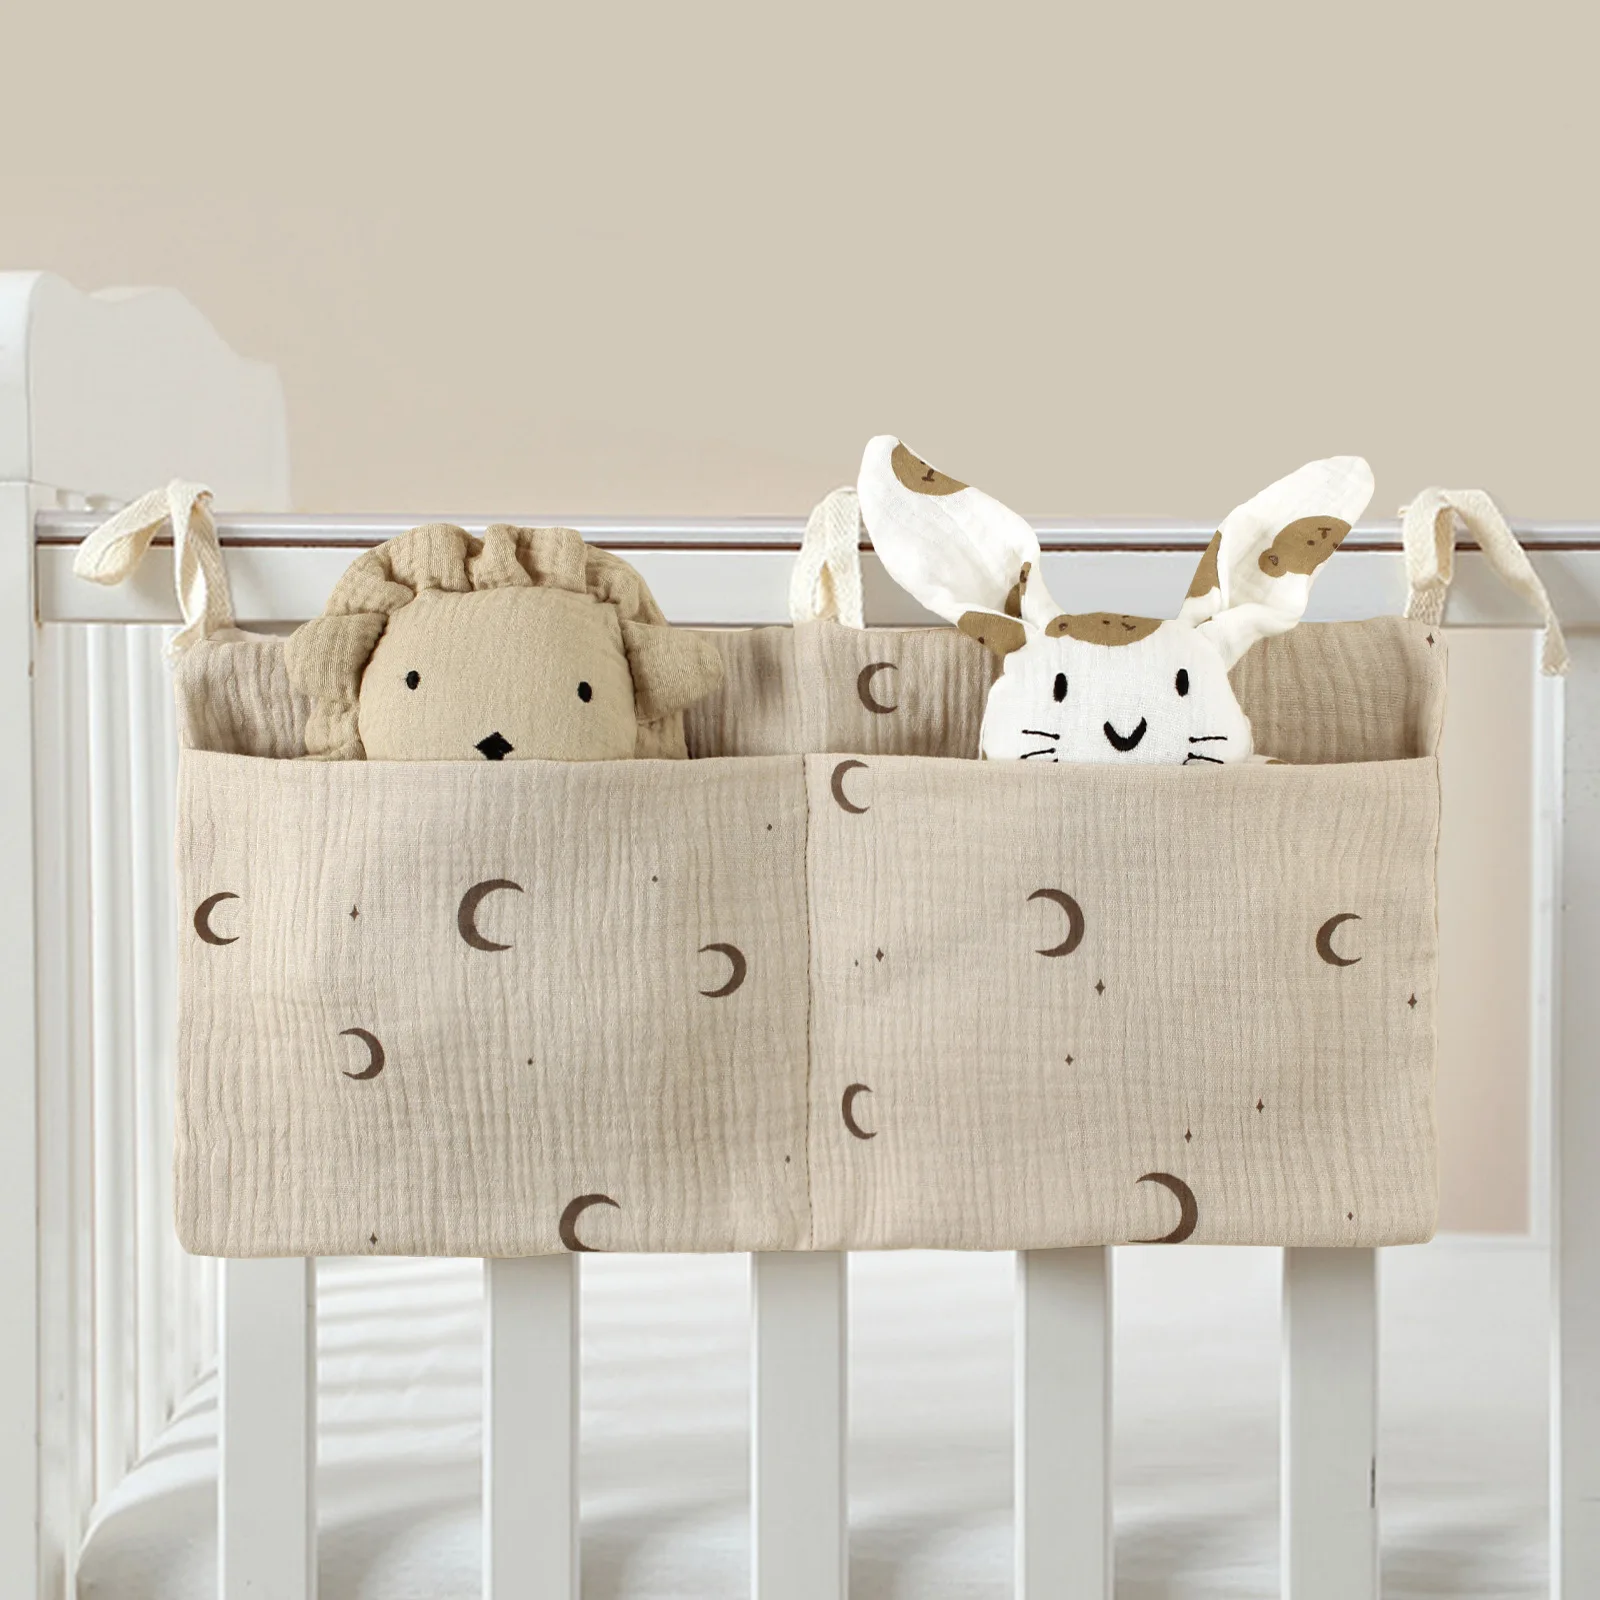 Muslin Cotton Double Pocket Baby Nursery Essentials Bedding Crib Organizer Hanging Diaper Storage Bag for Clothing Diapers Toys